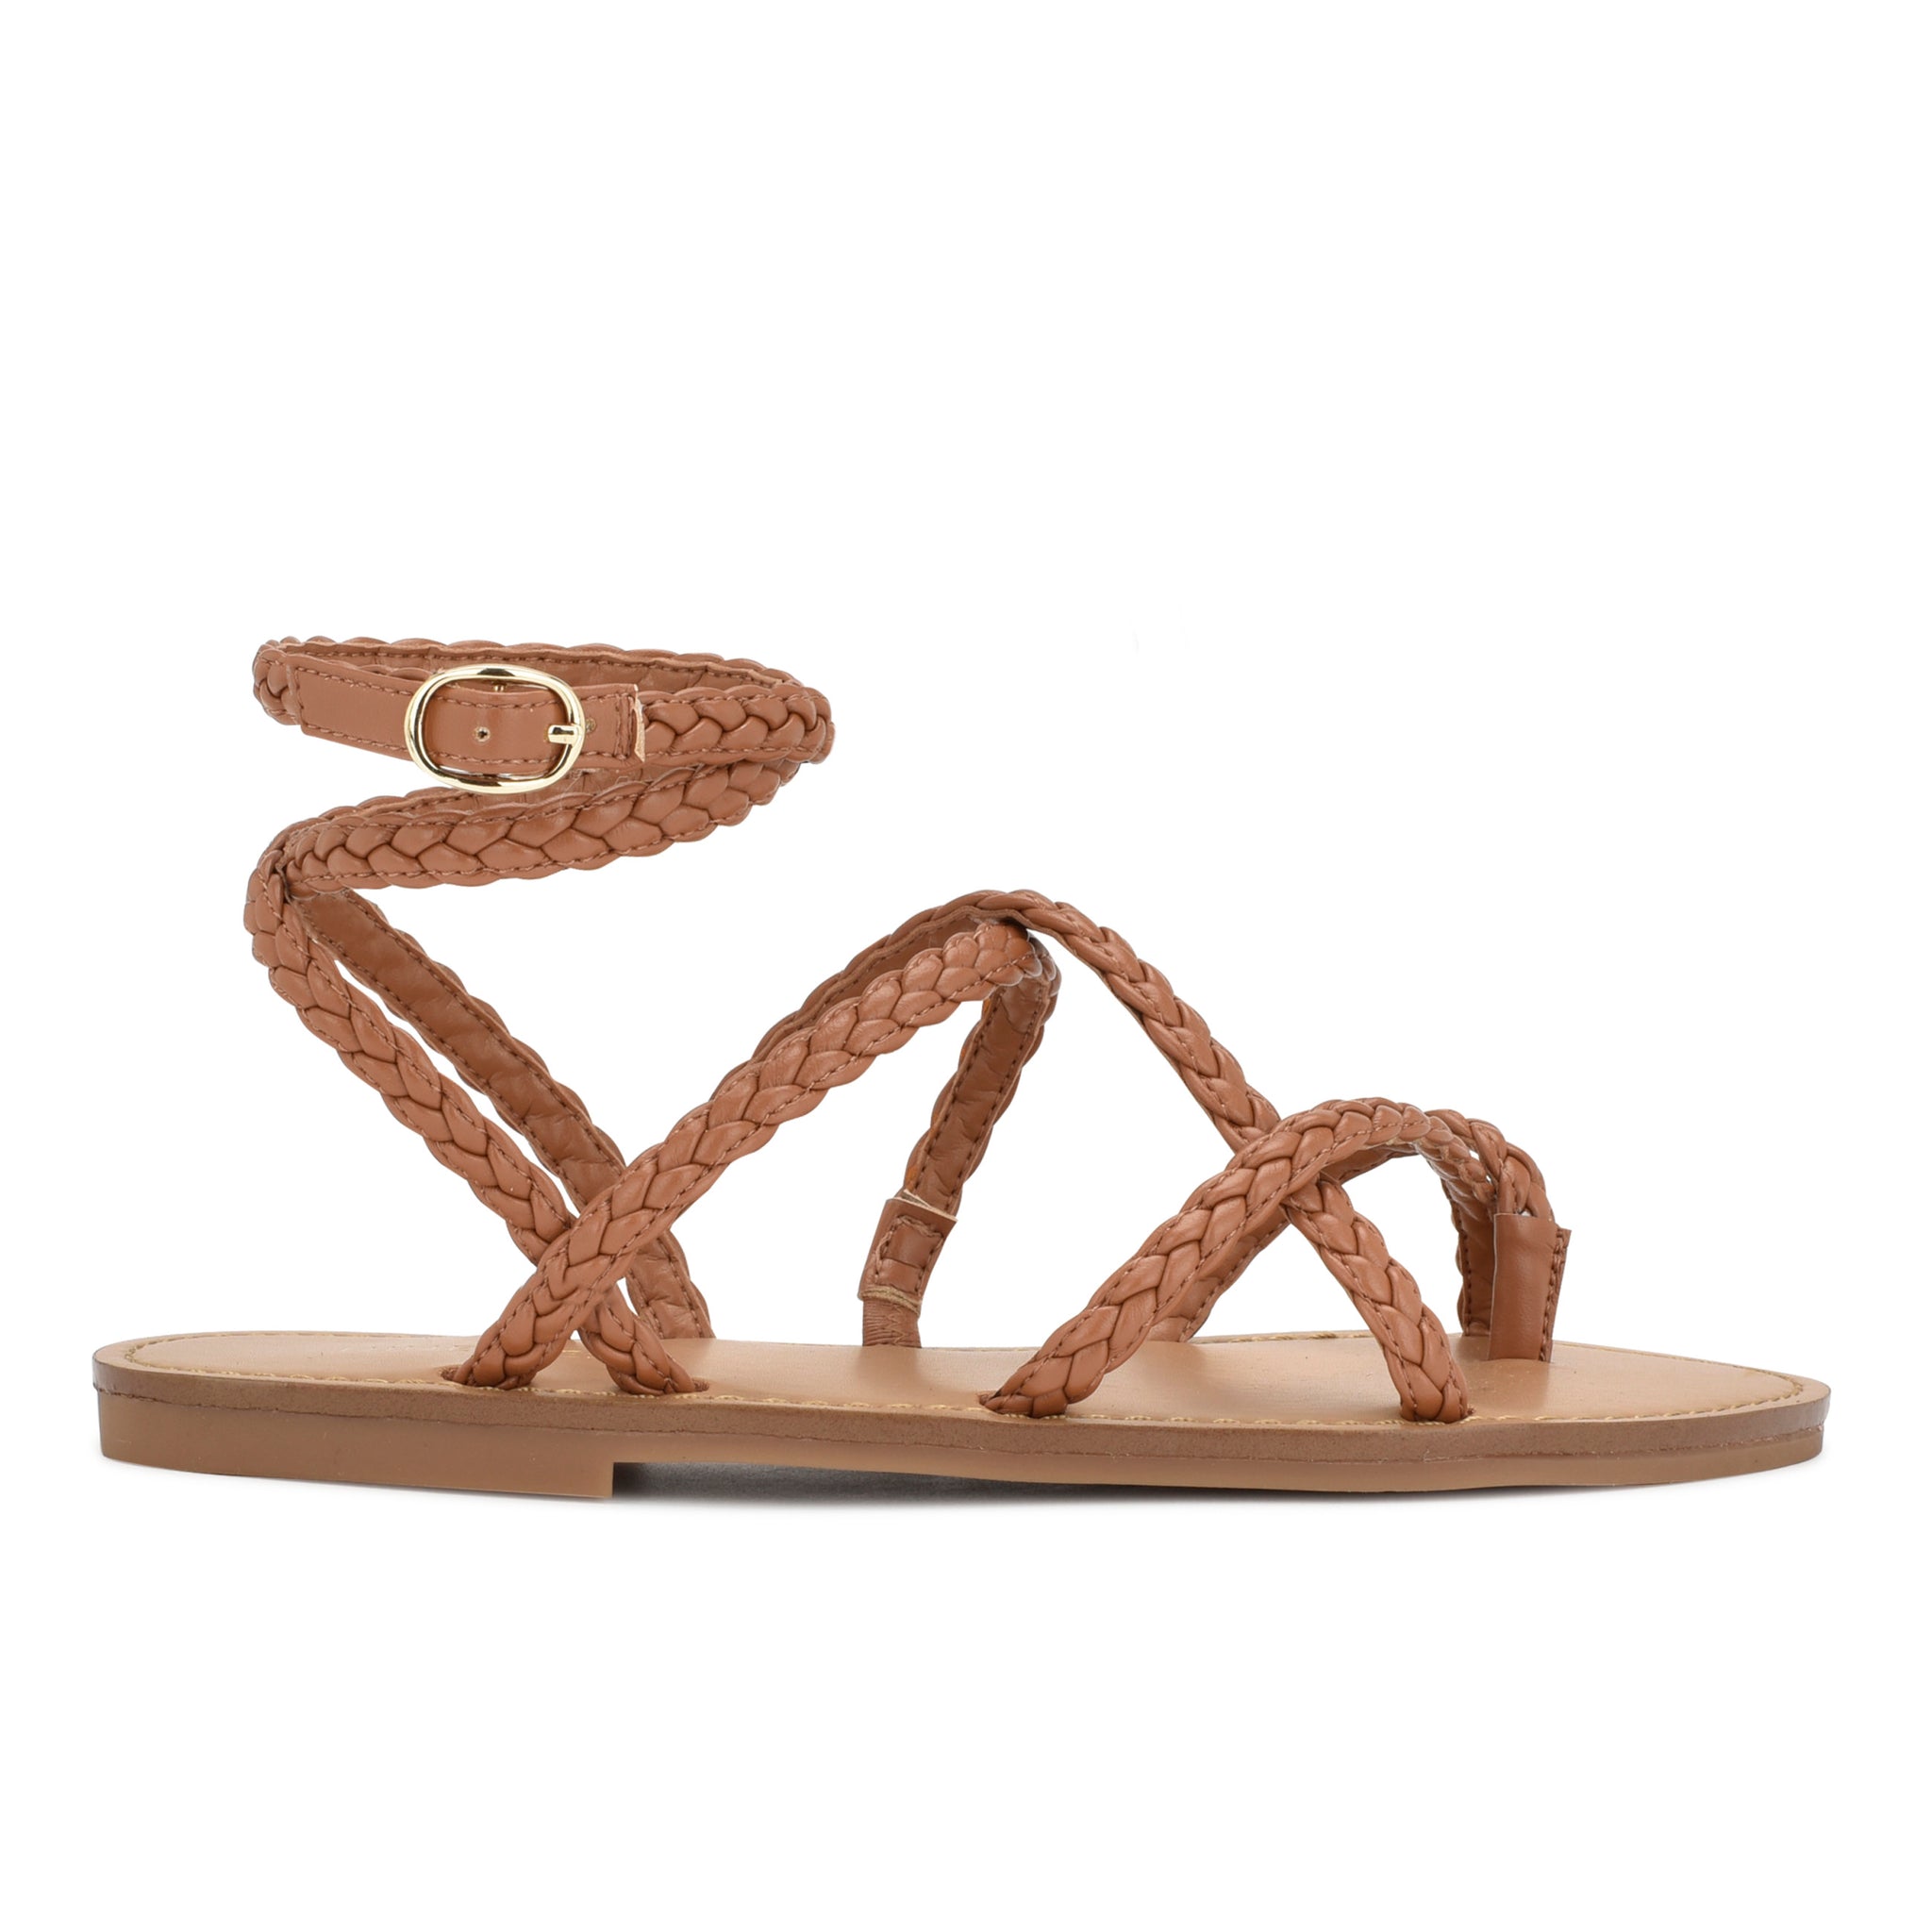 NINEWEST Coralin Ankle Wrap Flat Sandals